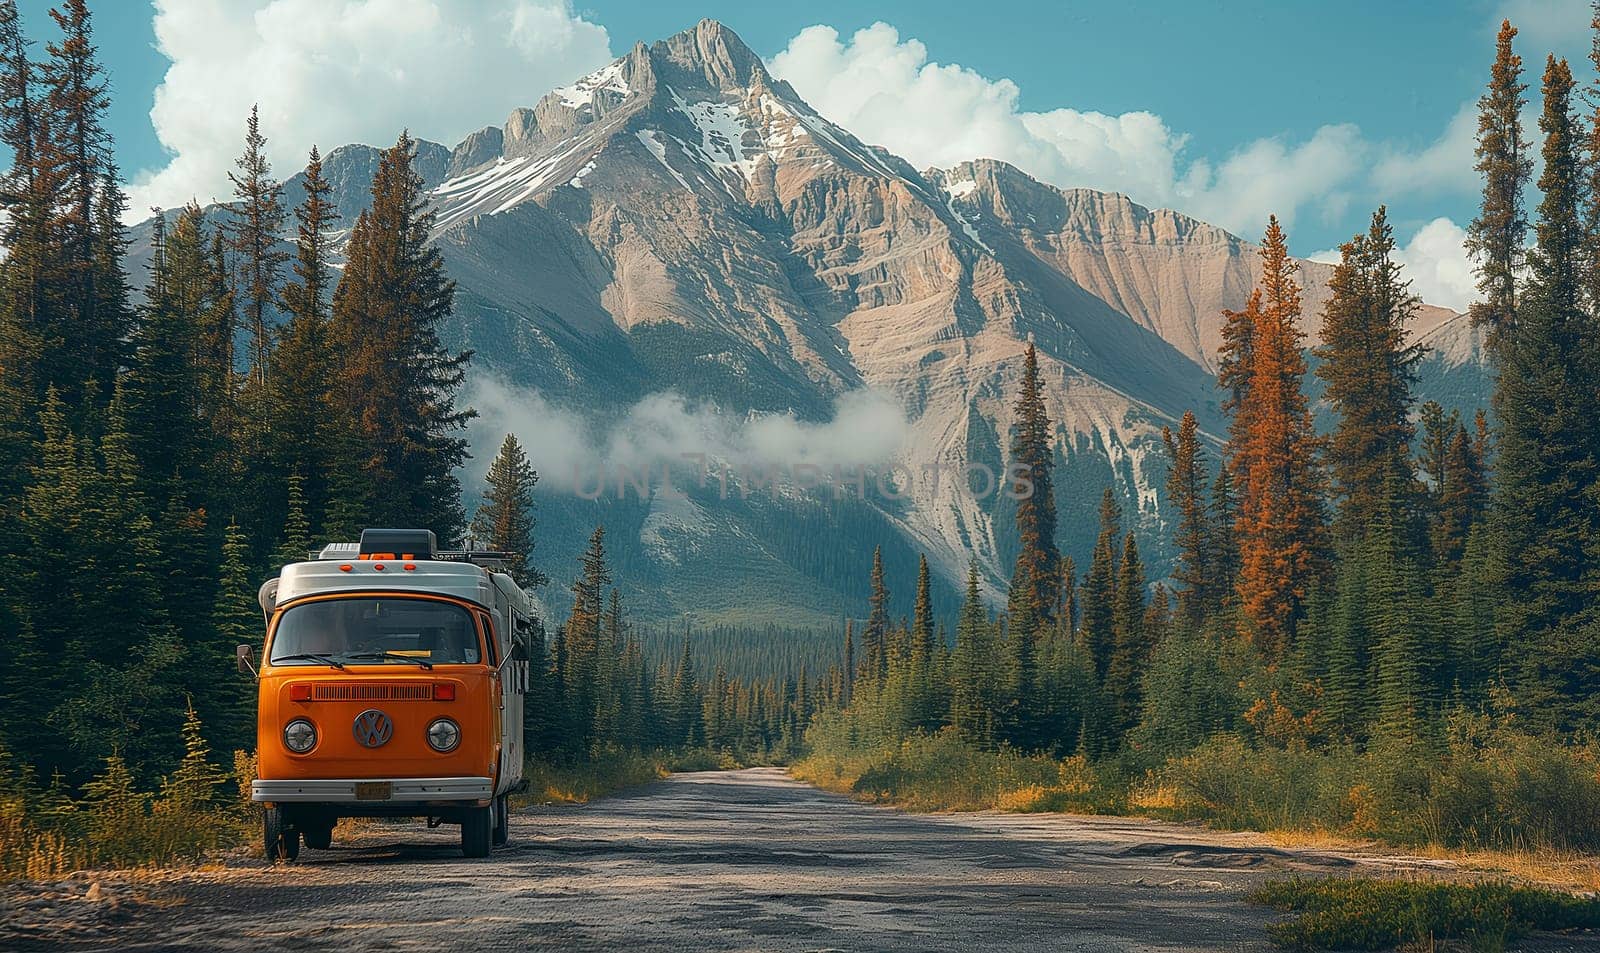 A van parked on a dirt road with a mountain backdrop.